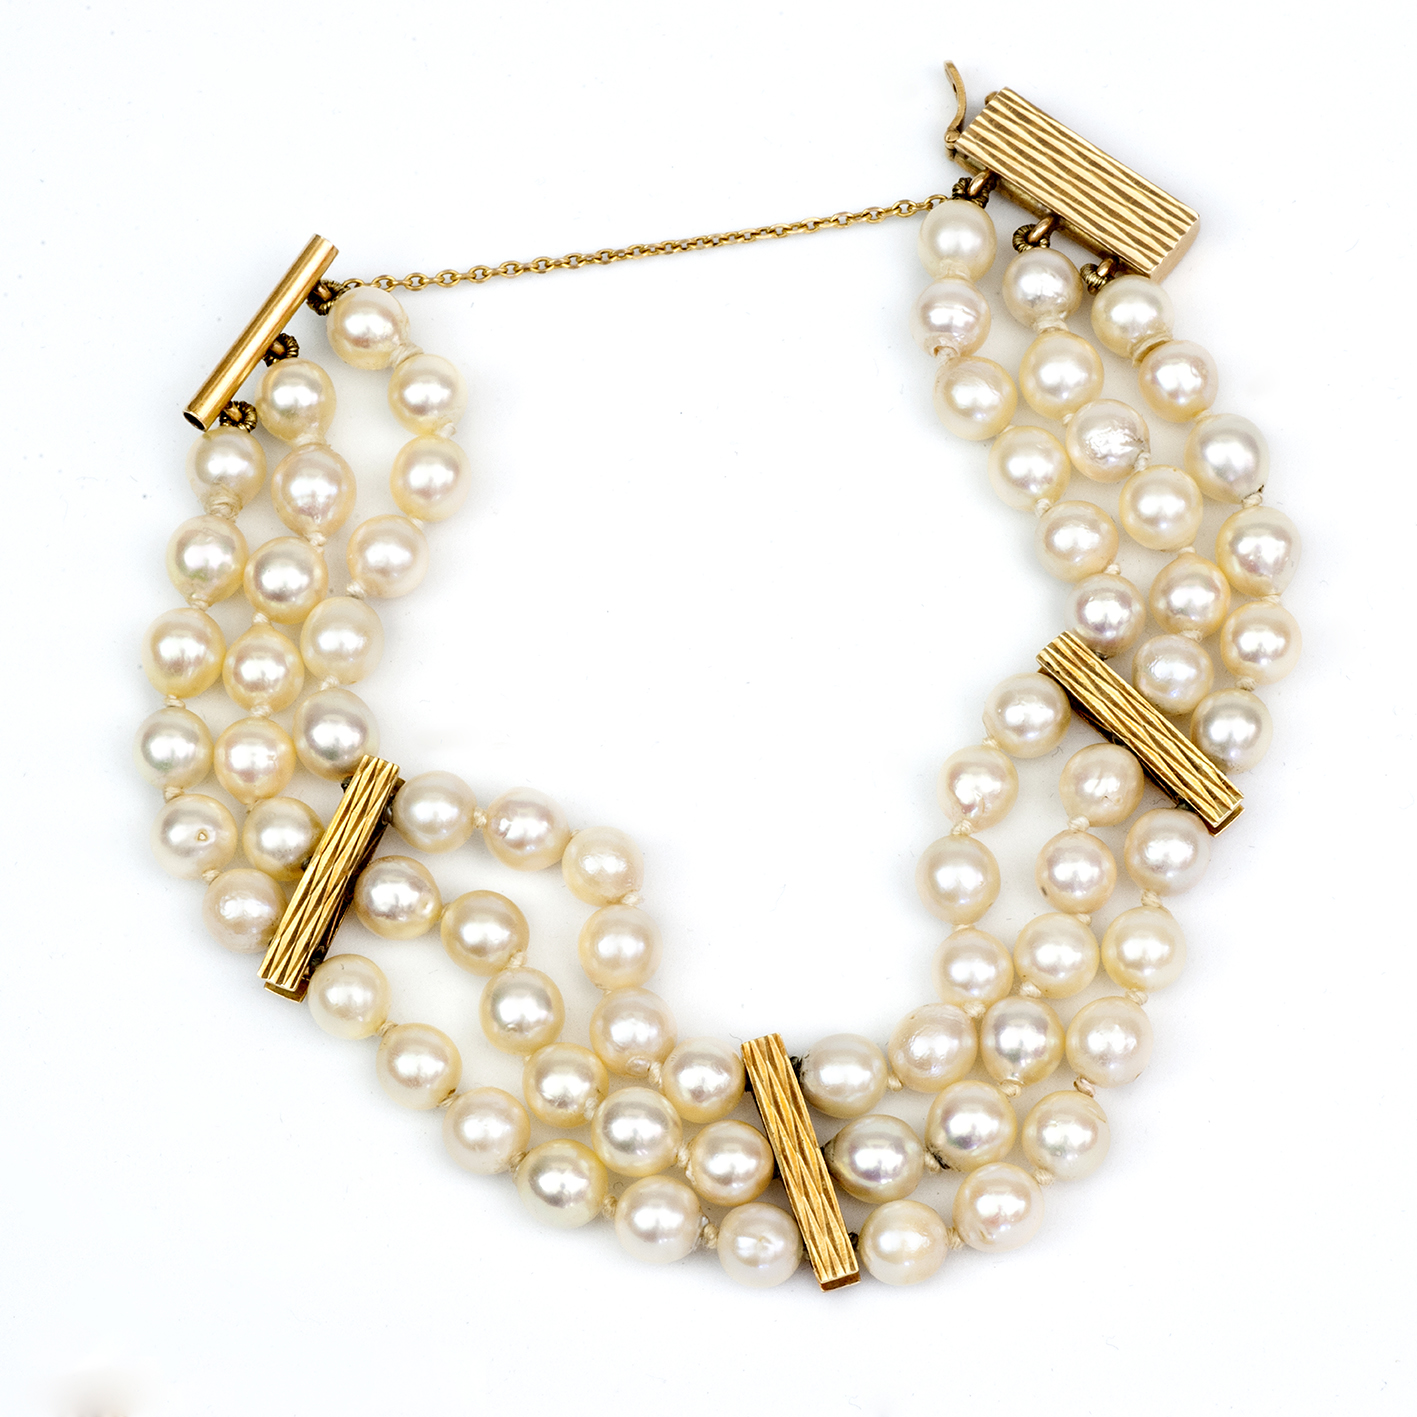 Pearl Bracelet | Save up to 80% with Pearls Only France